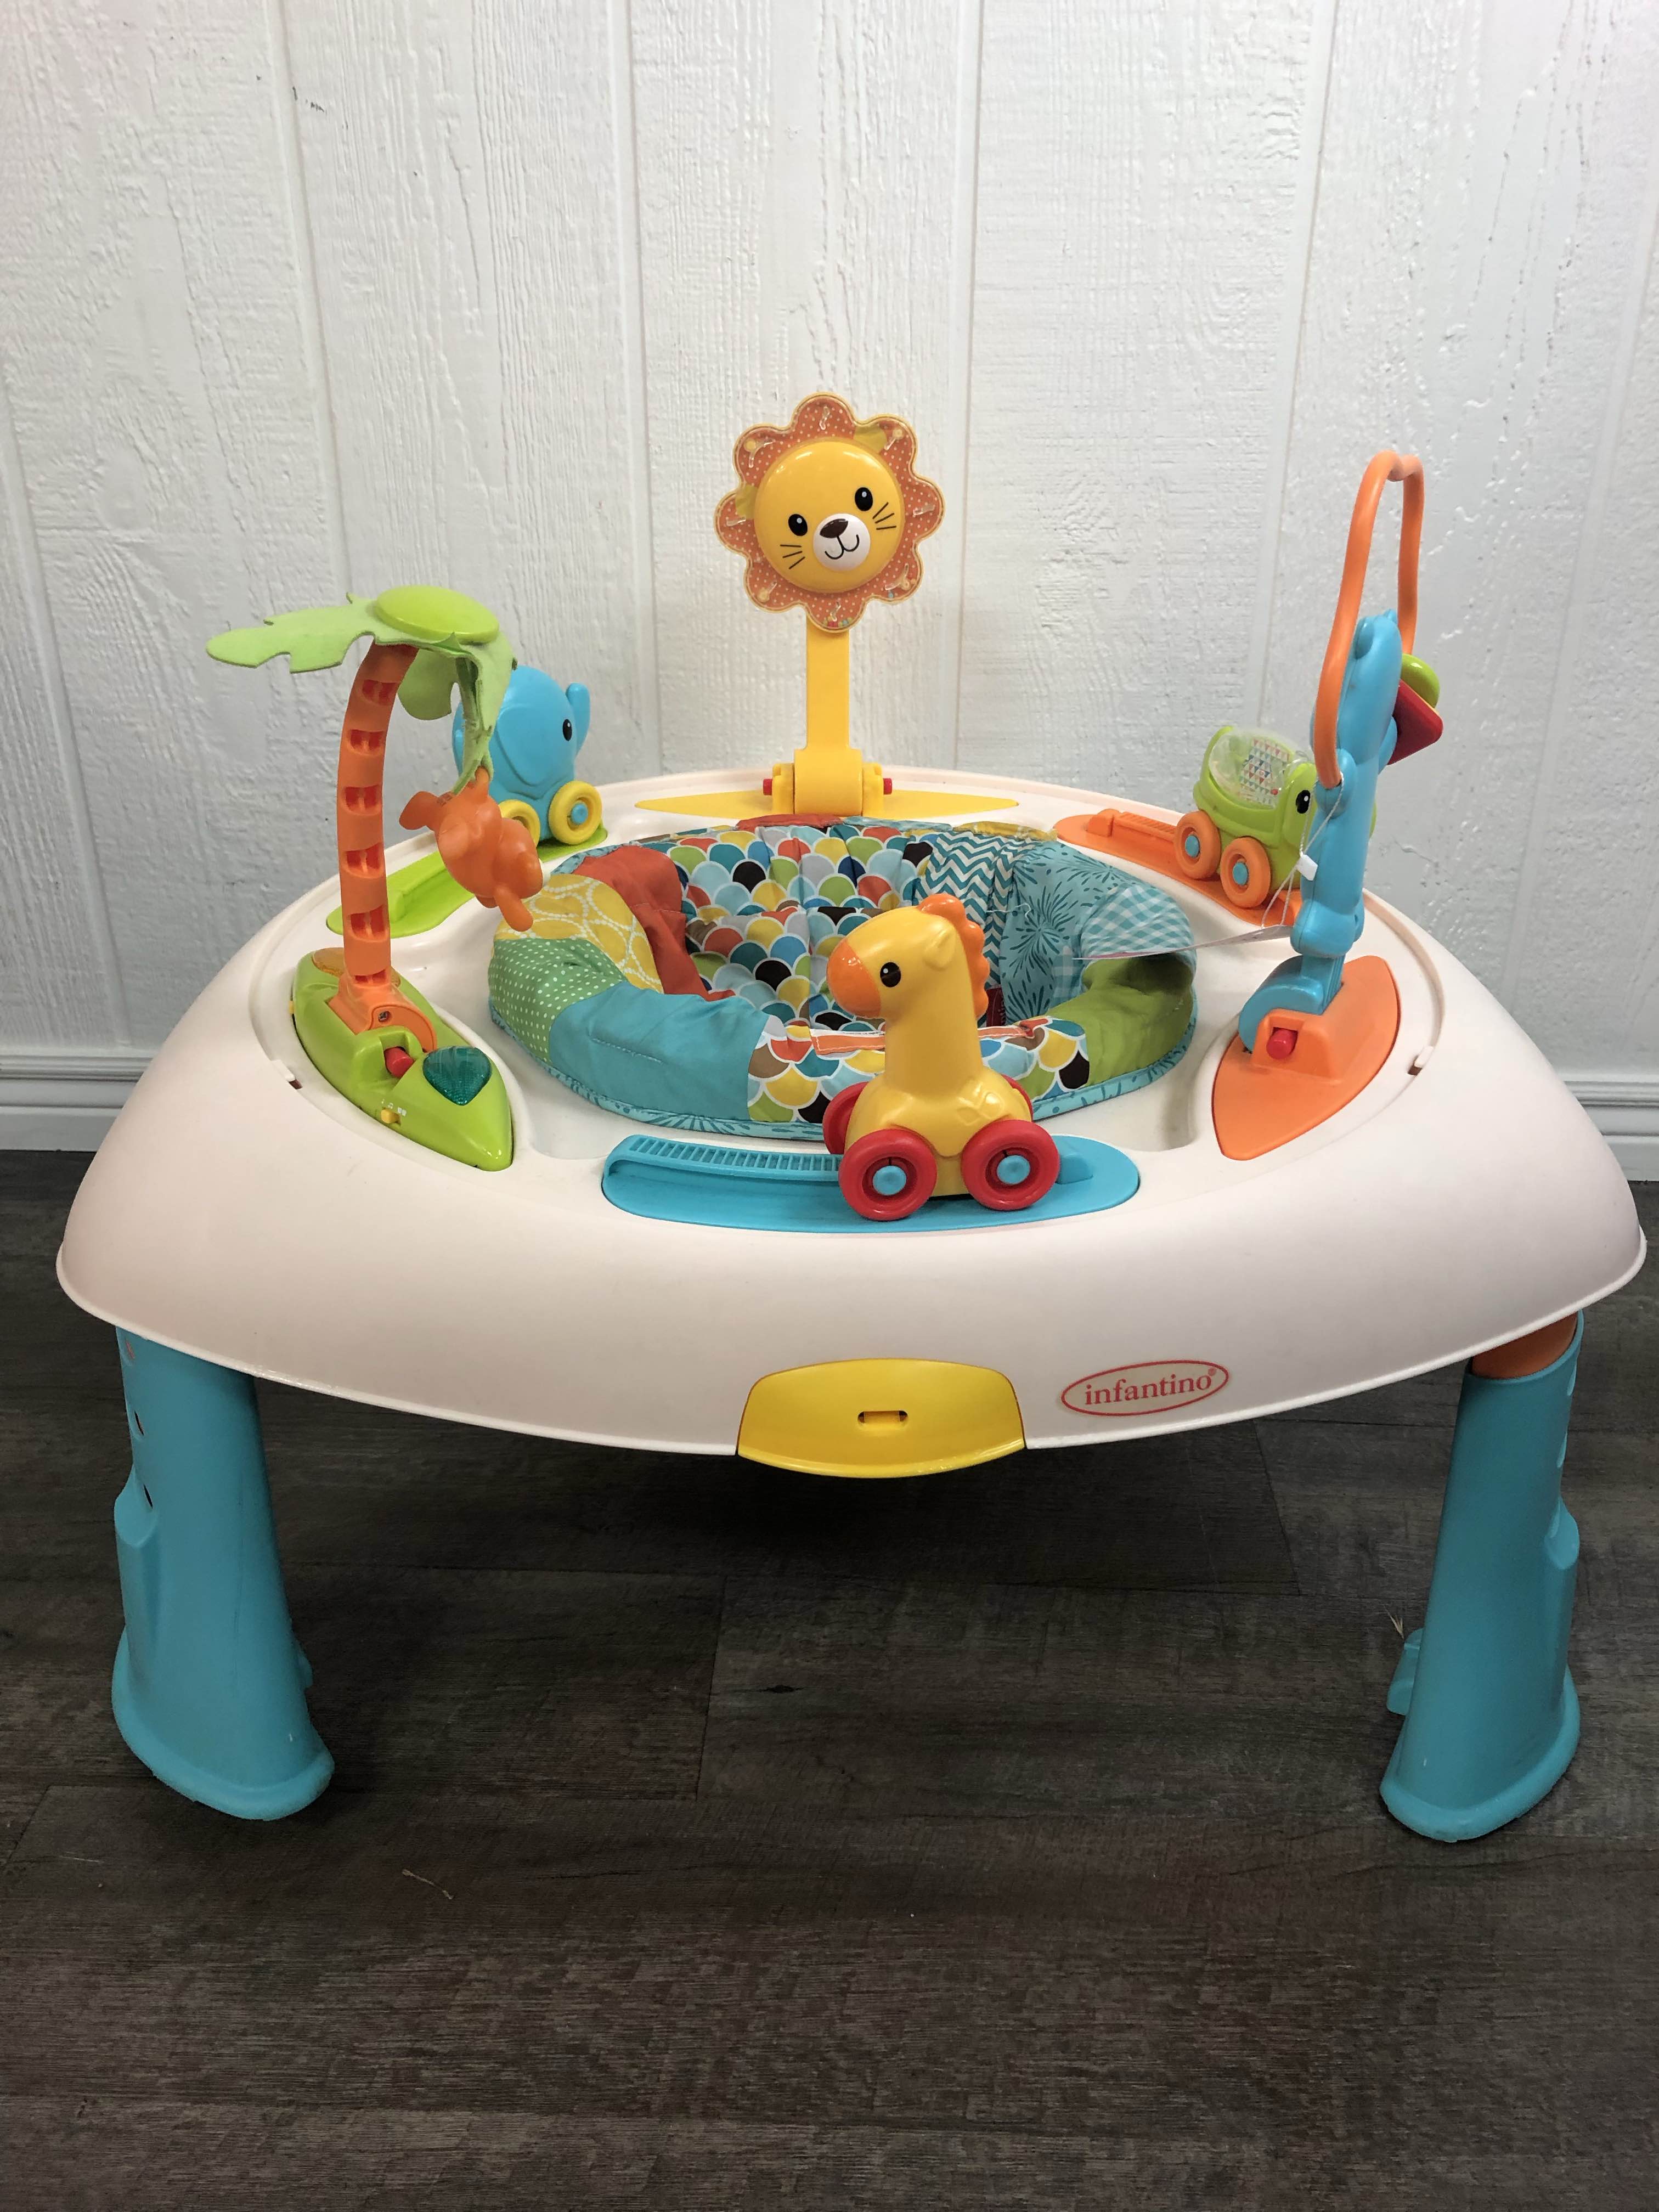 infantino sit spin & stand entertainer